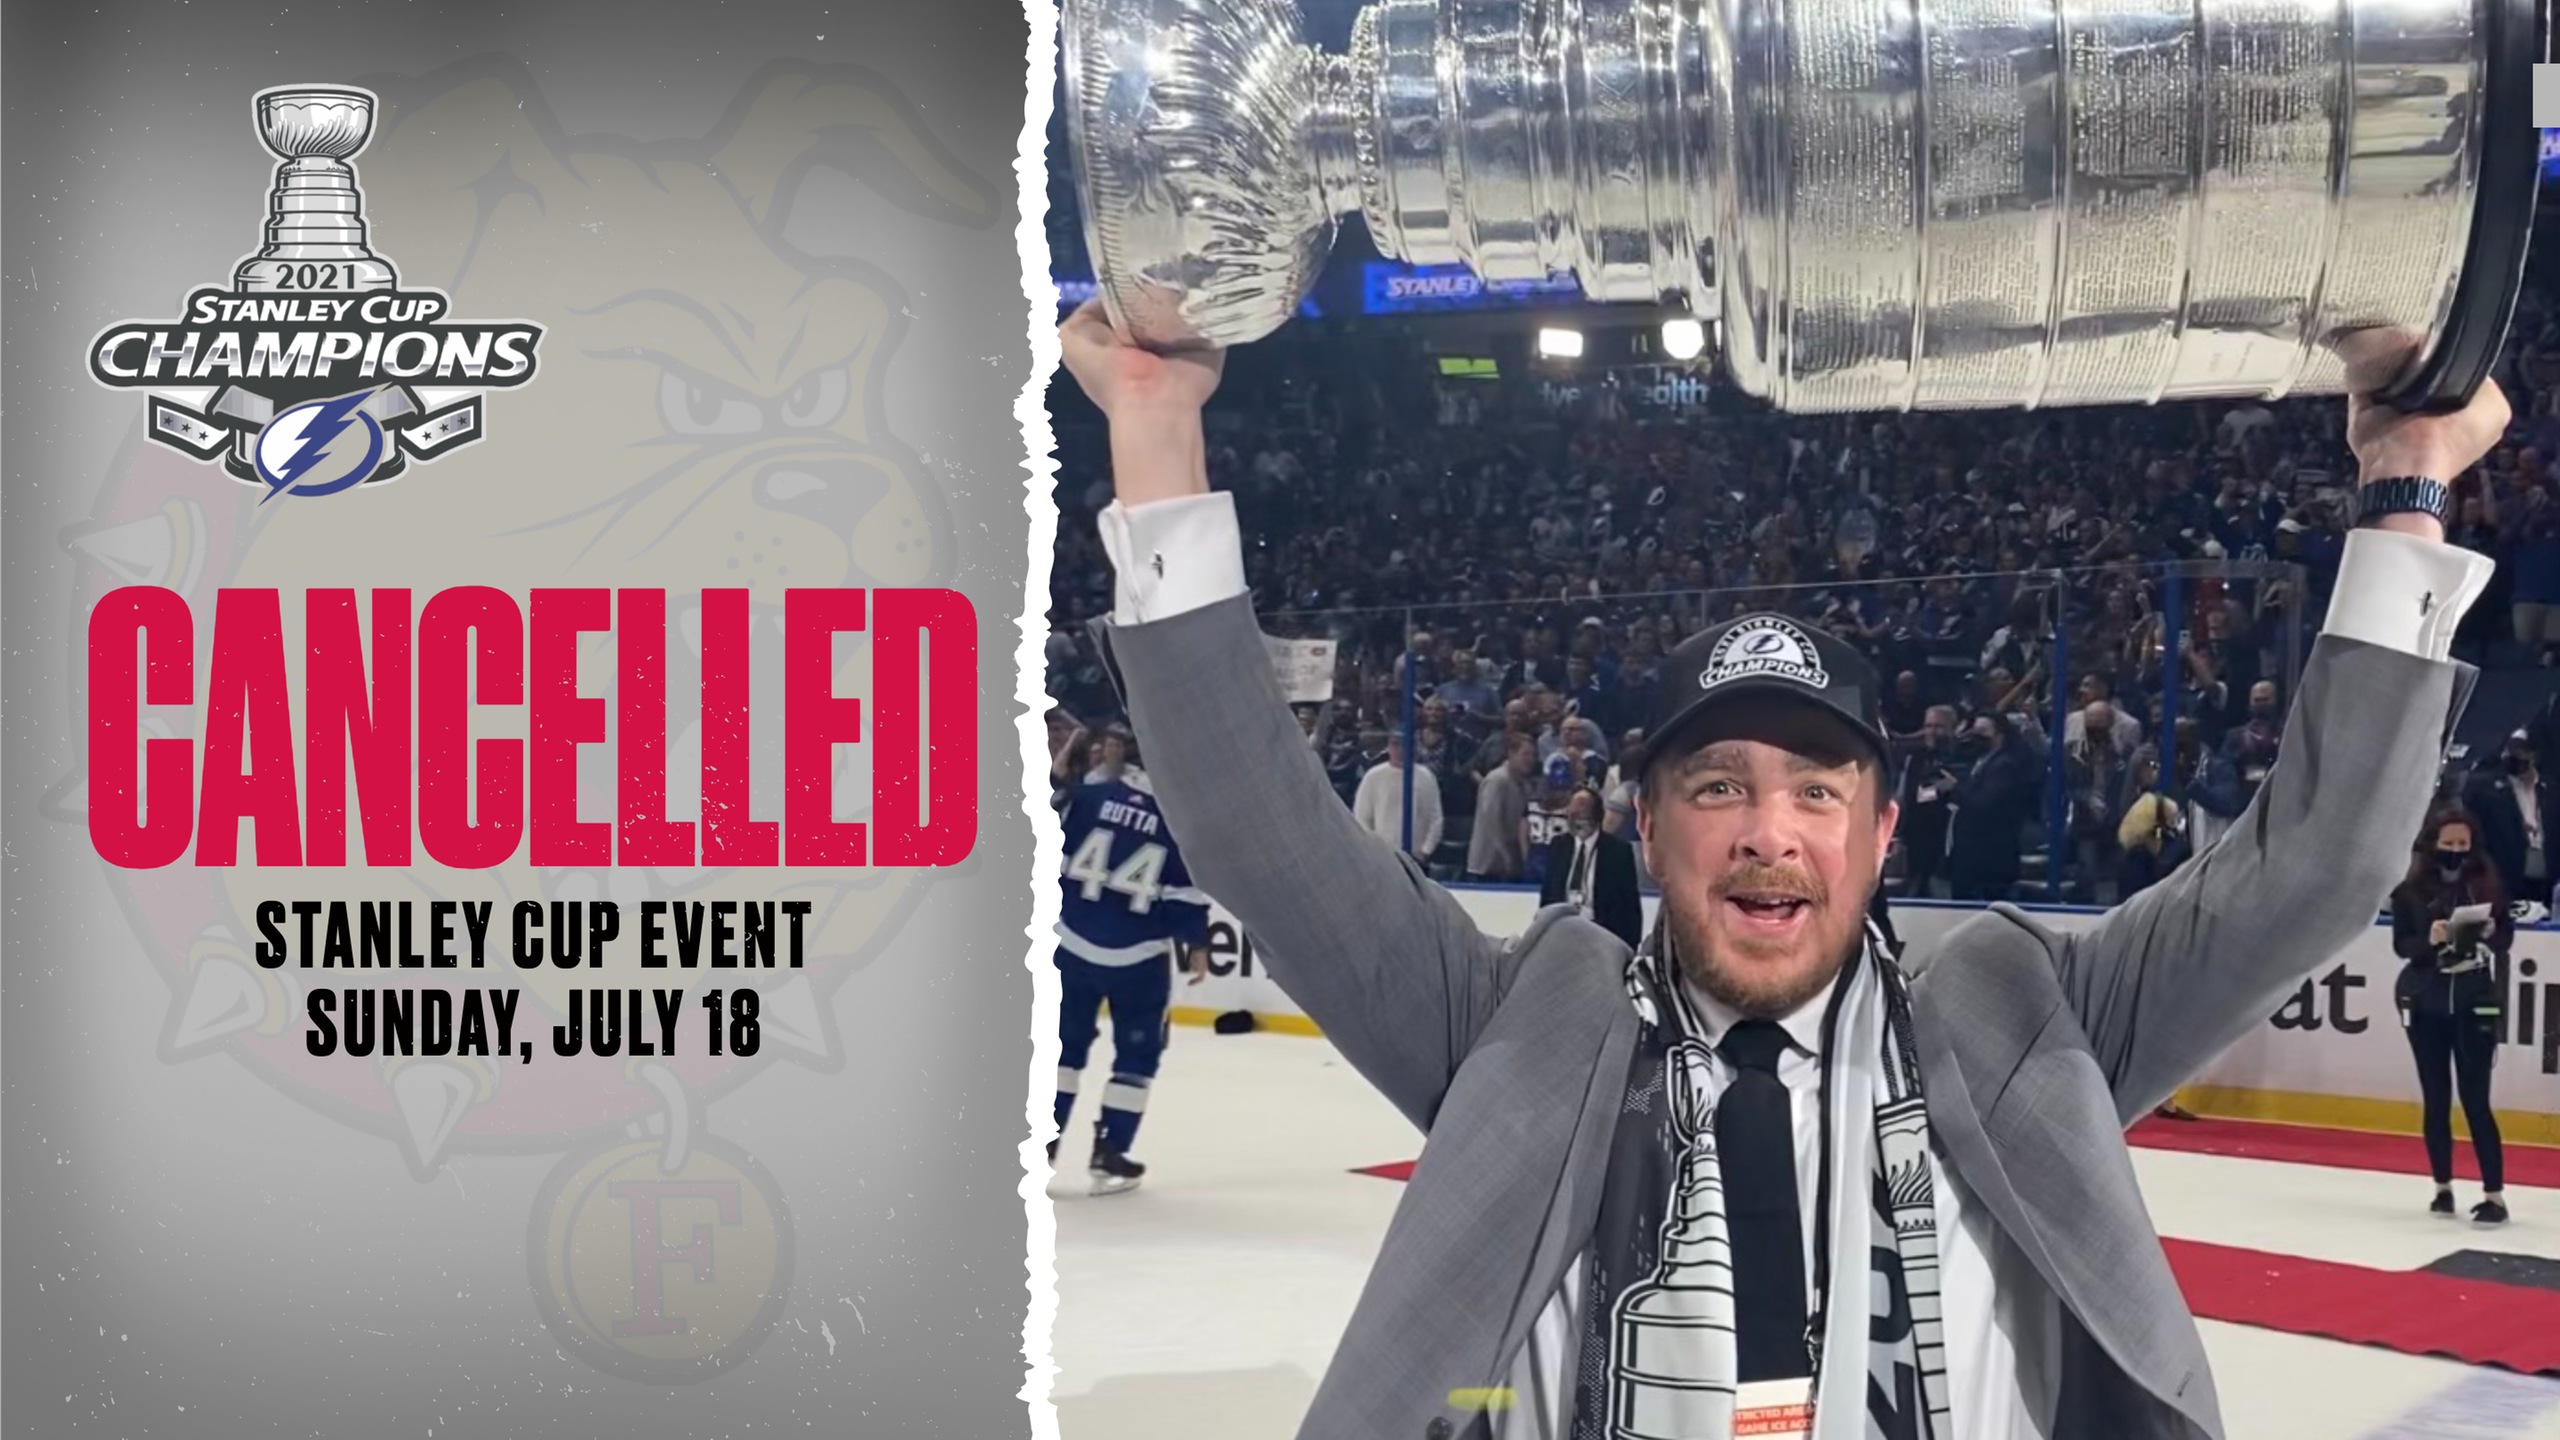 Sunday's Stanley Cup Celebration Event Cancelled Due To COVID-19 Protocols